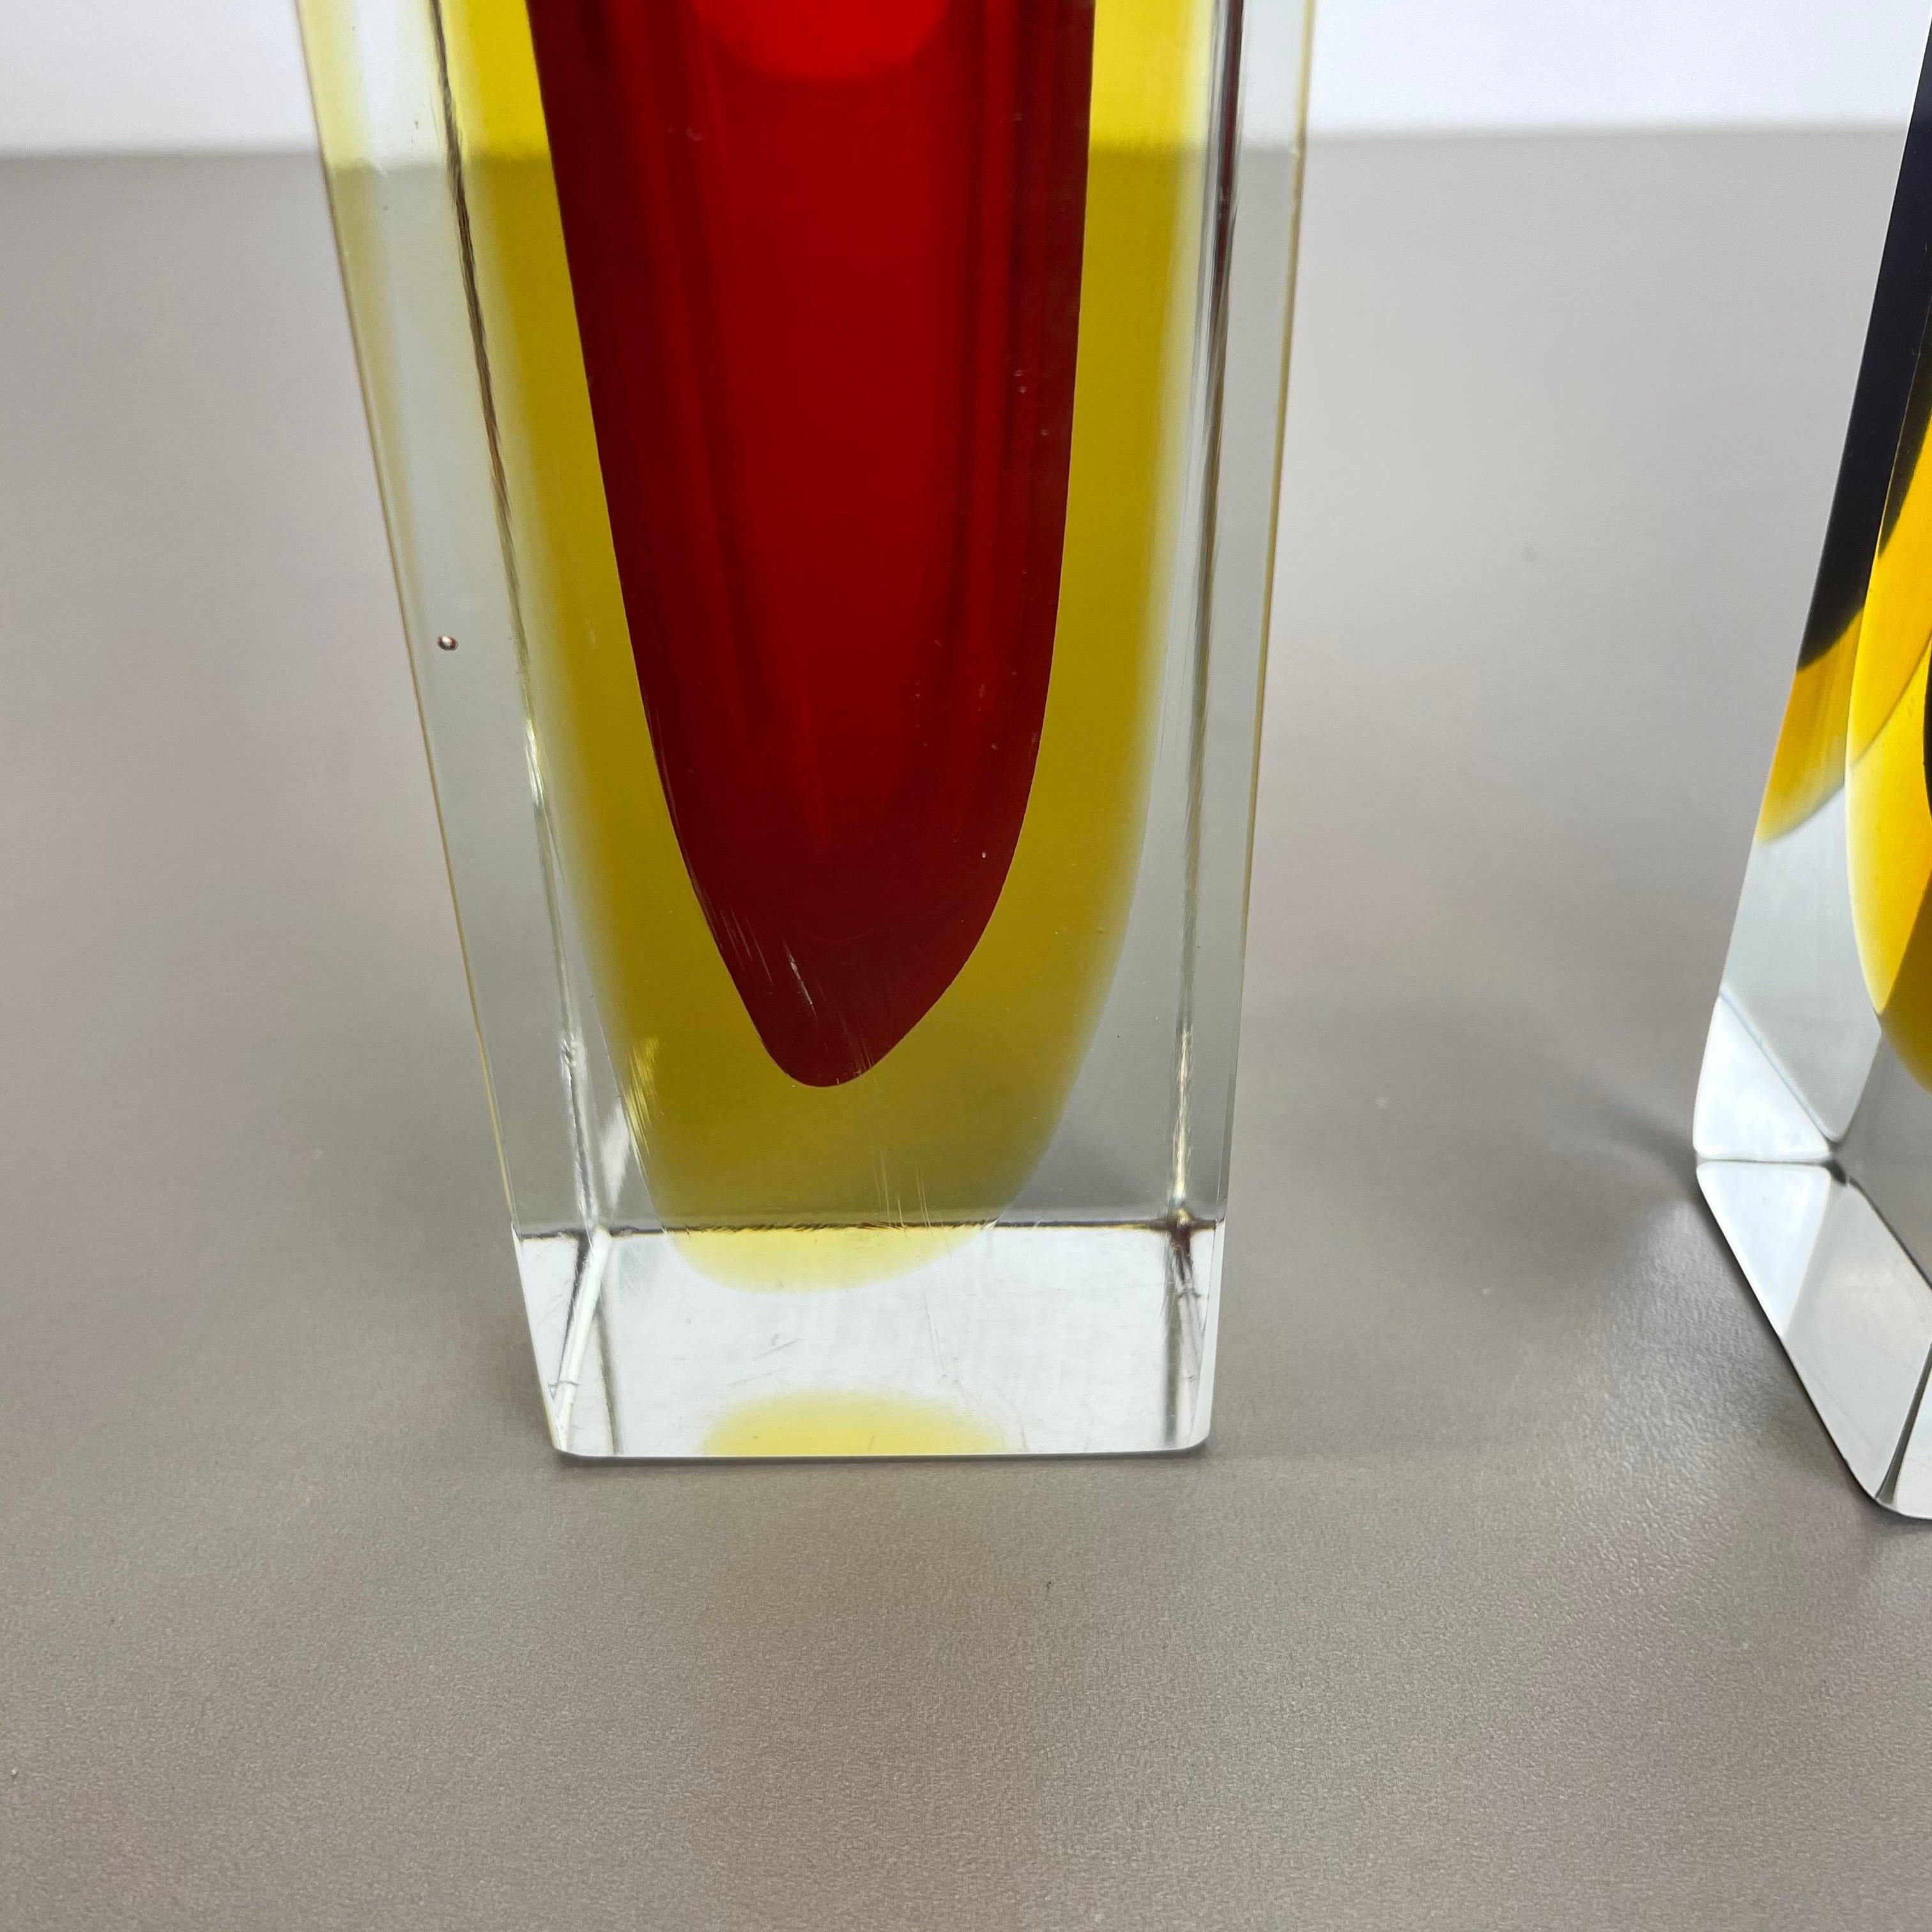 Set of 2 Faceted Murano Glass Sommerso Vases by Cenedese Vetri, Italy, 1970s For Sale 6